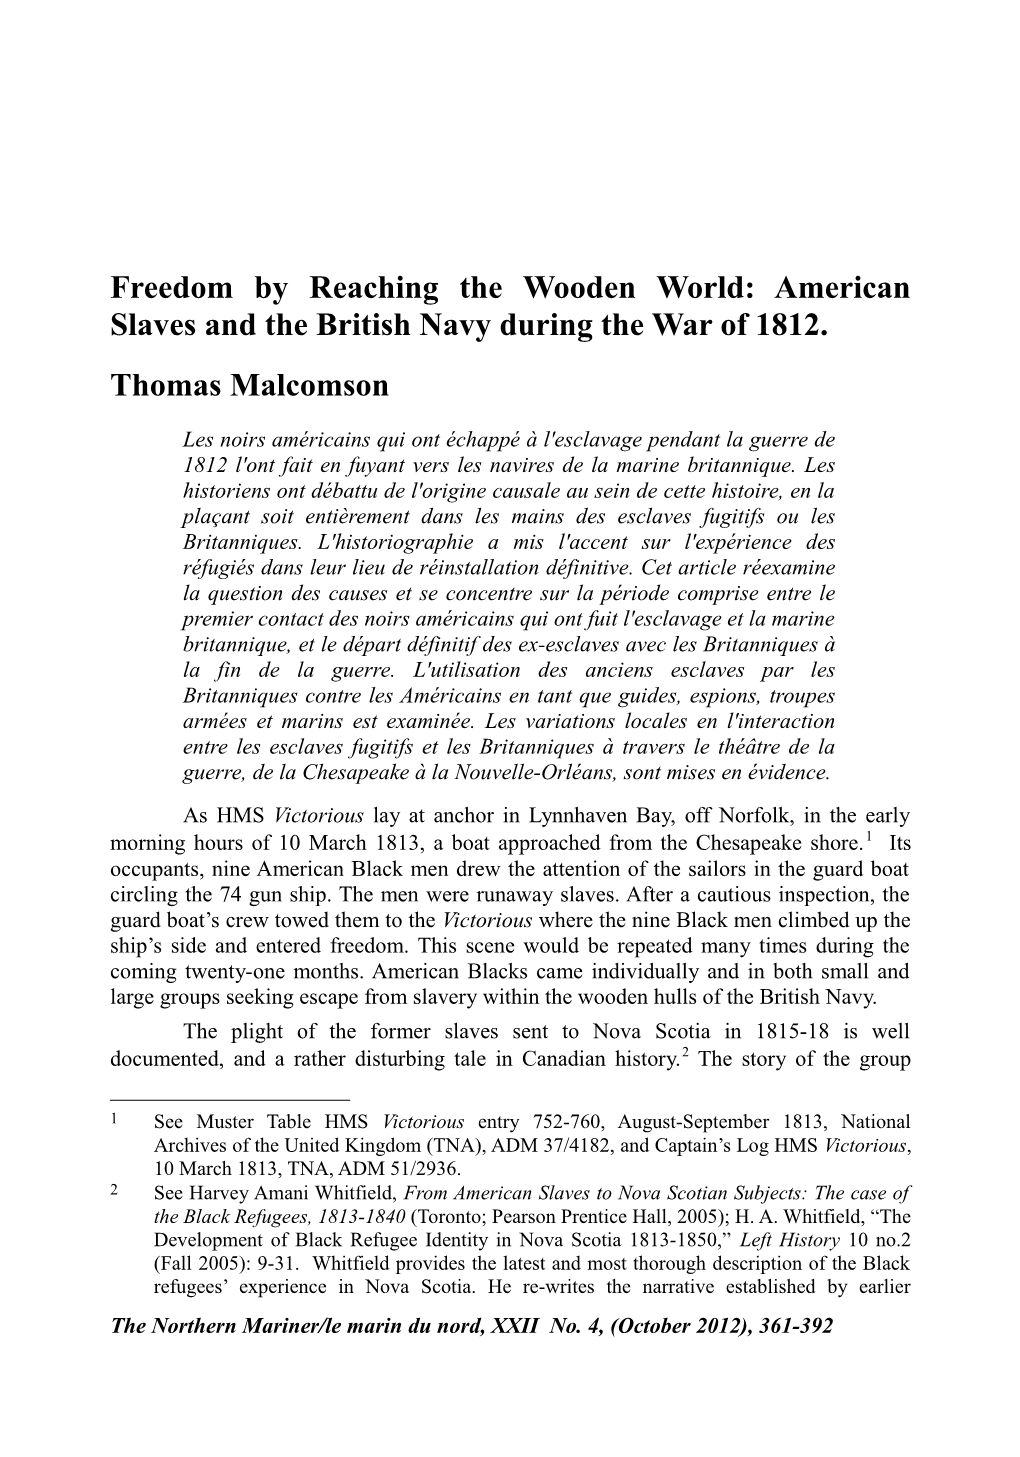 Freedom by Reaching the Wooden World: American Slaves and the British Navy During the War of 1812